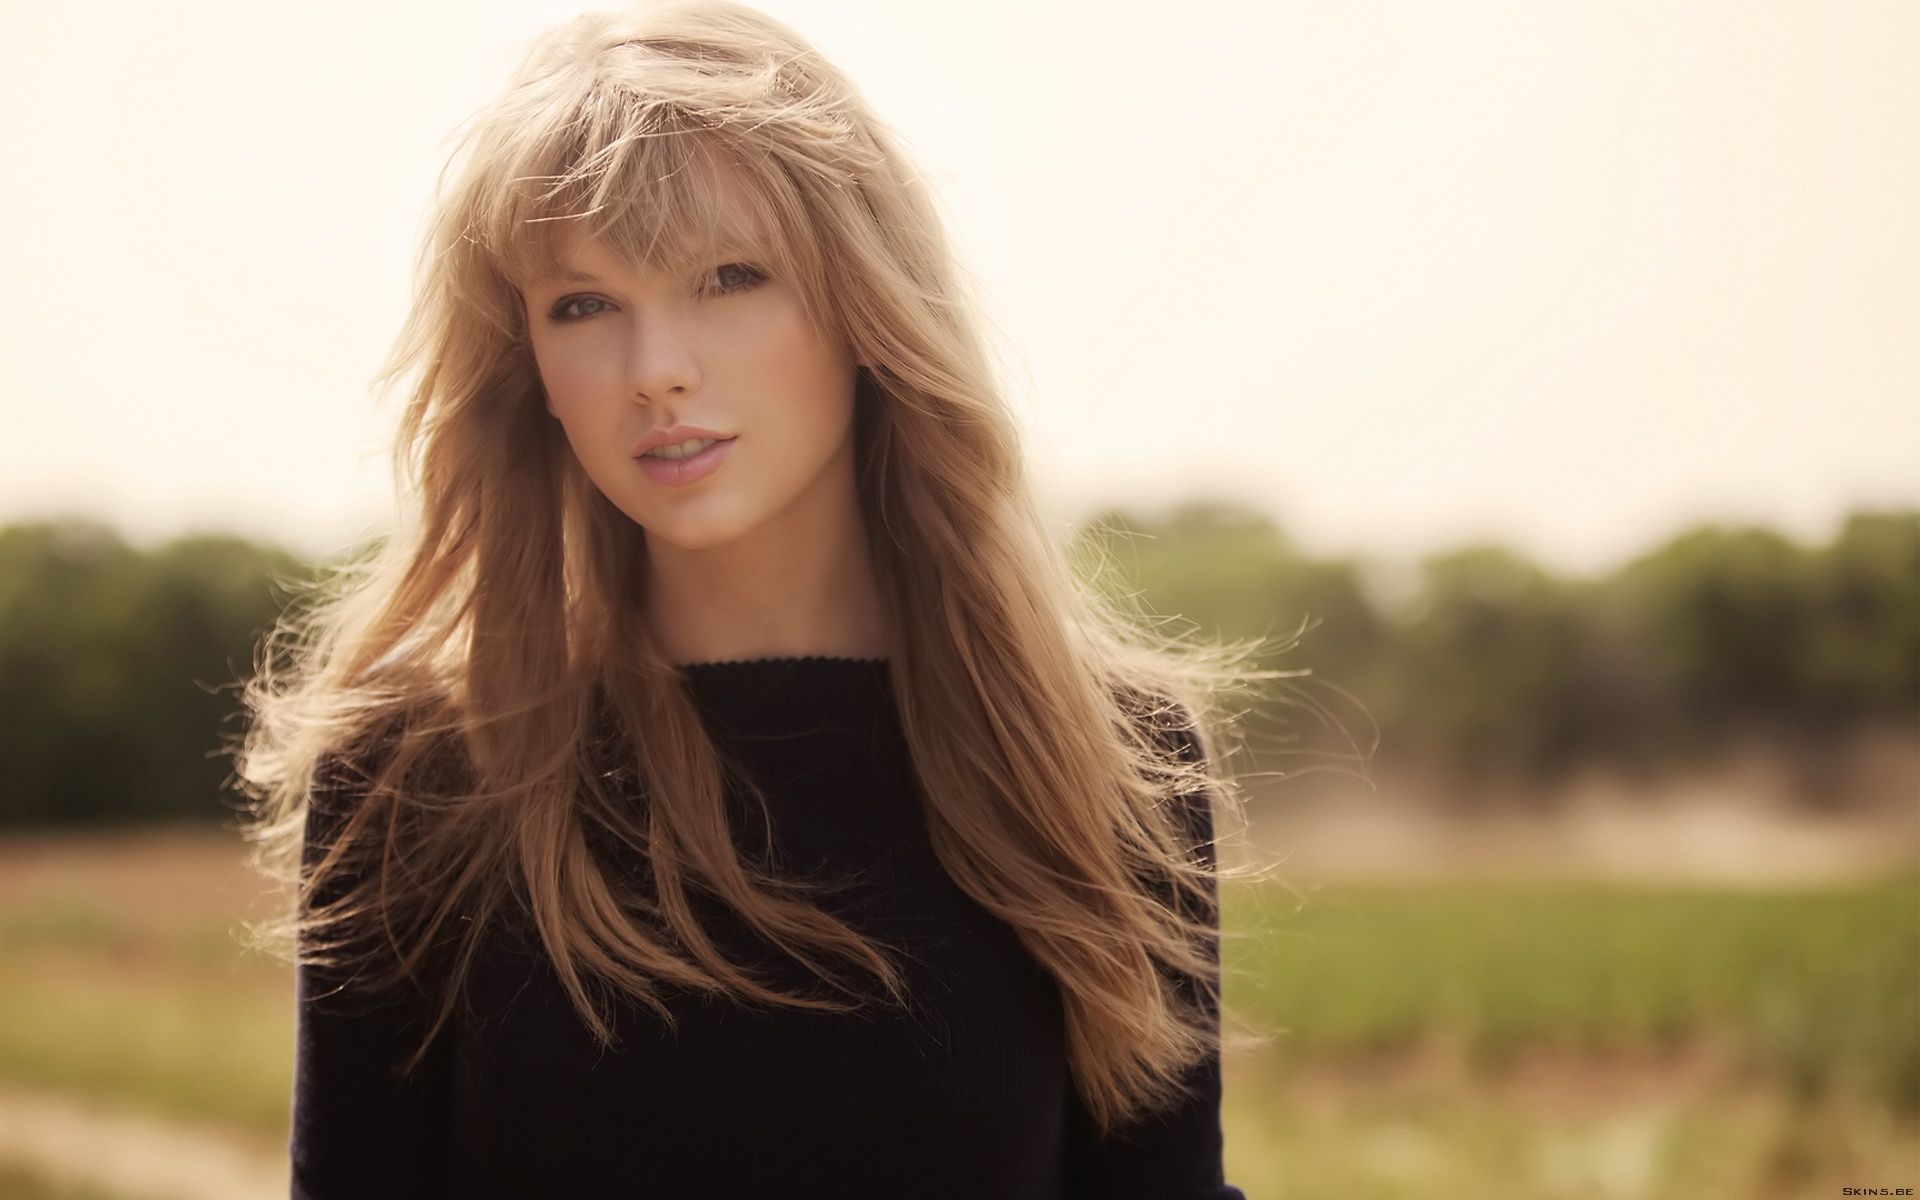 Taylor Wallpapers